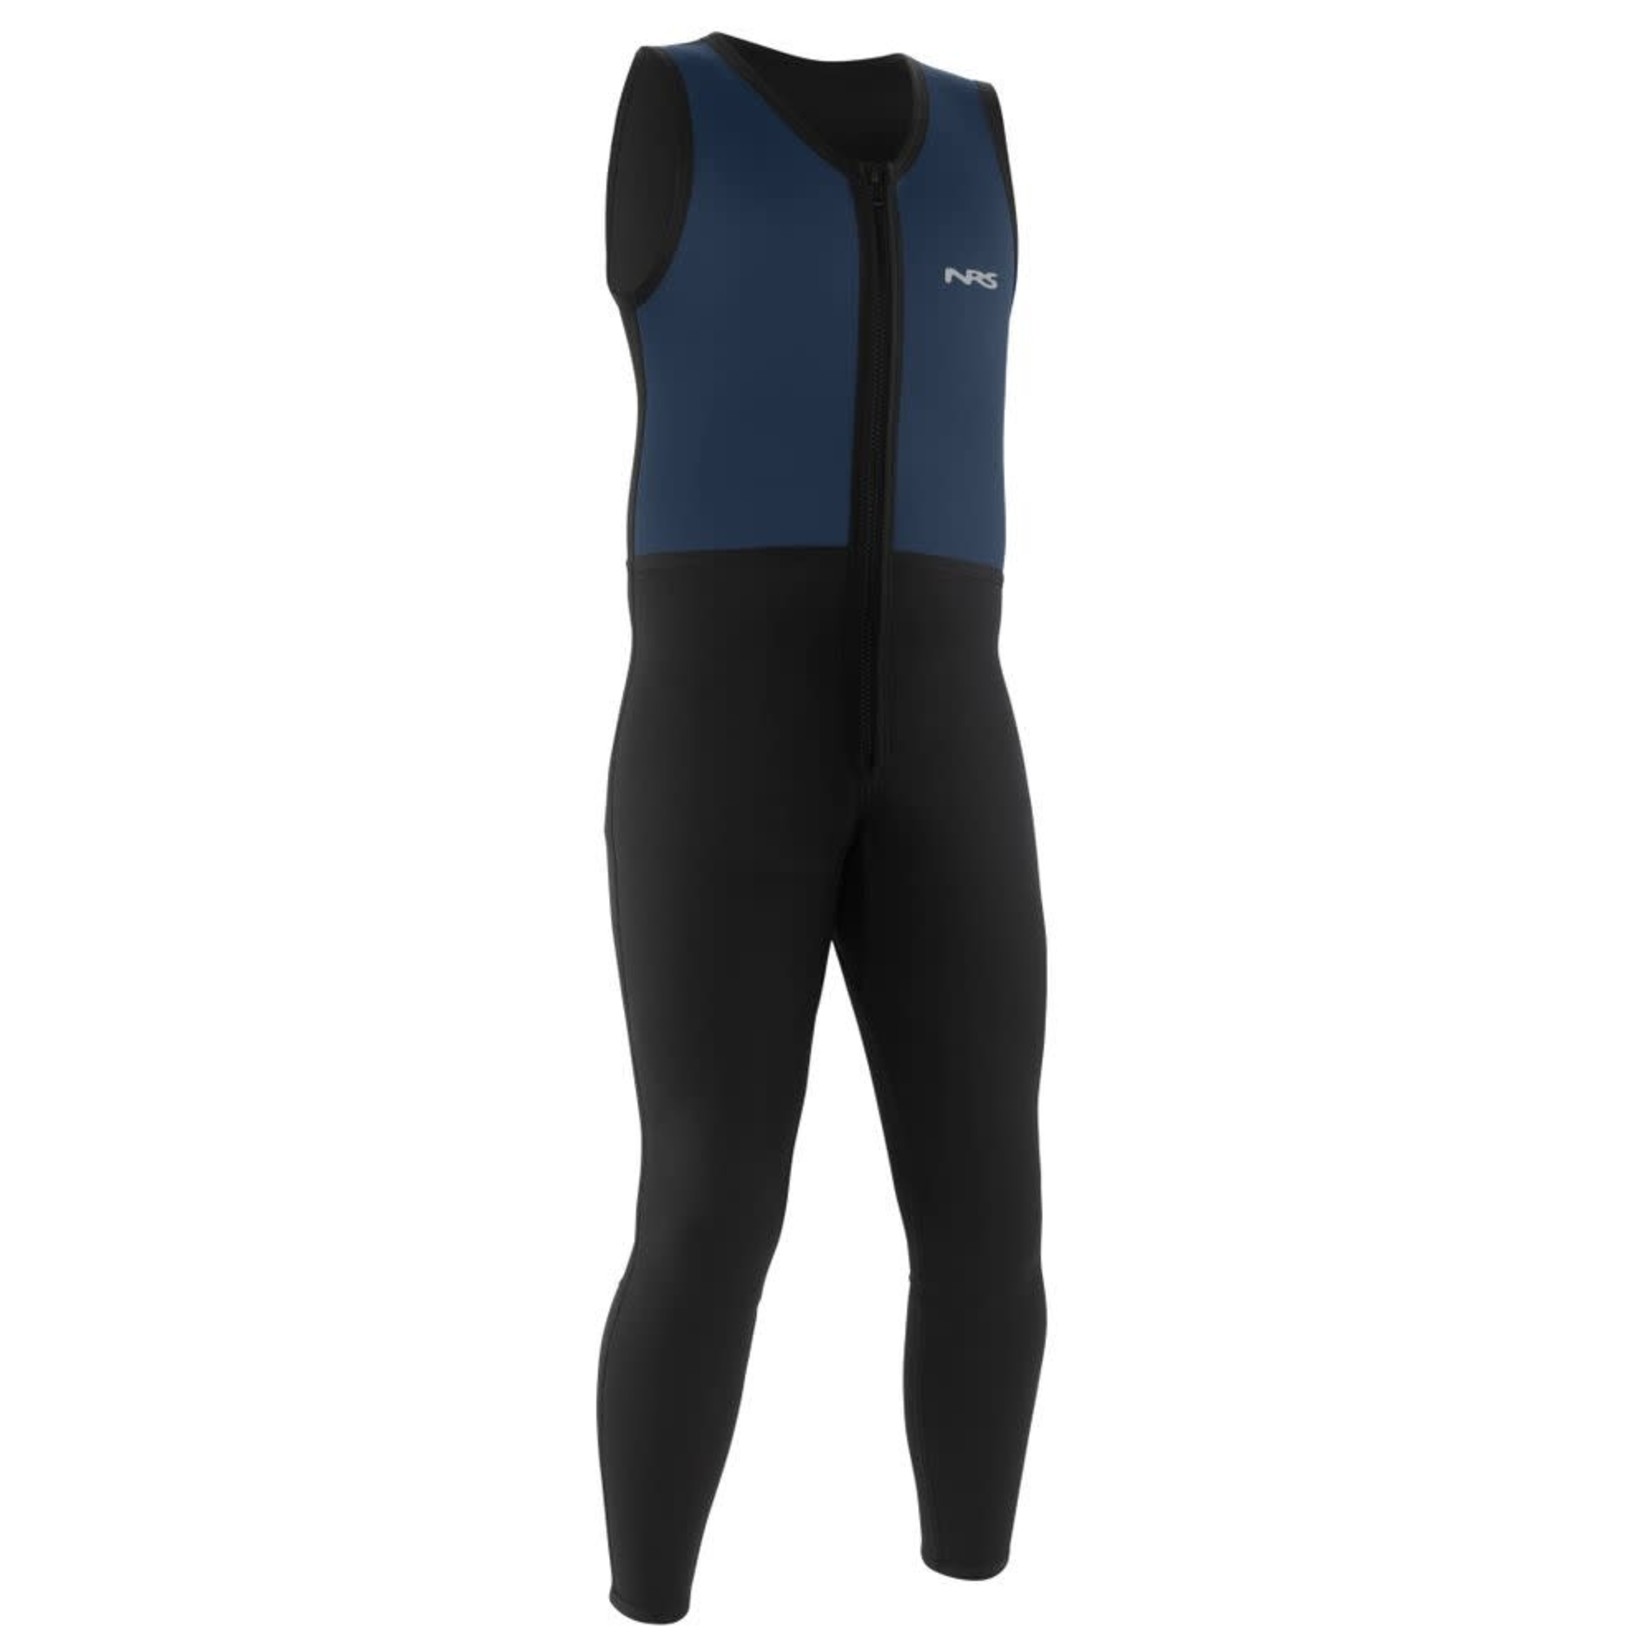 NRS NRS 3mm Outfitter Bill Wetsuit